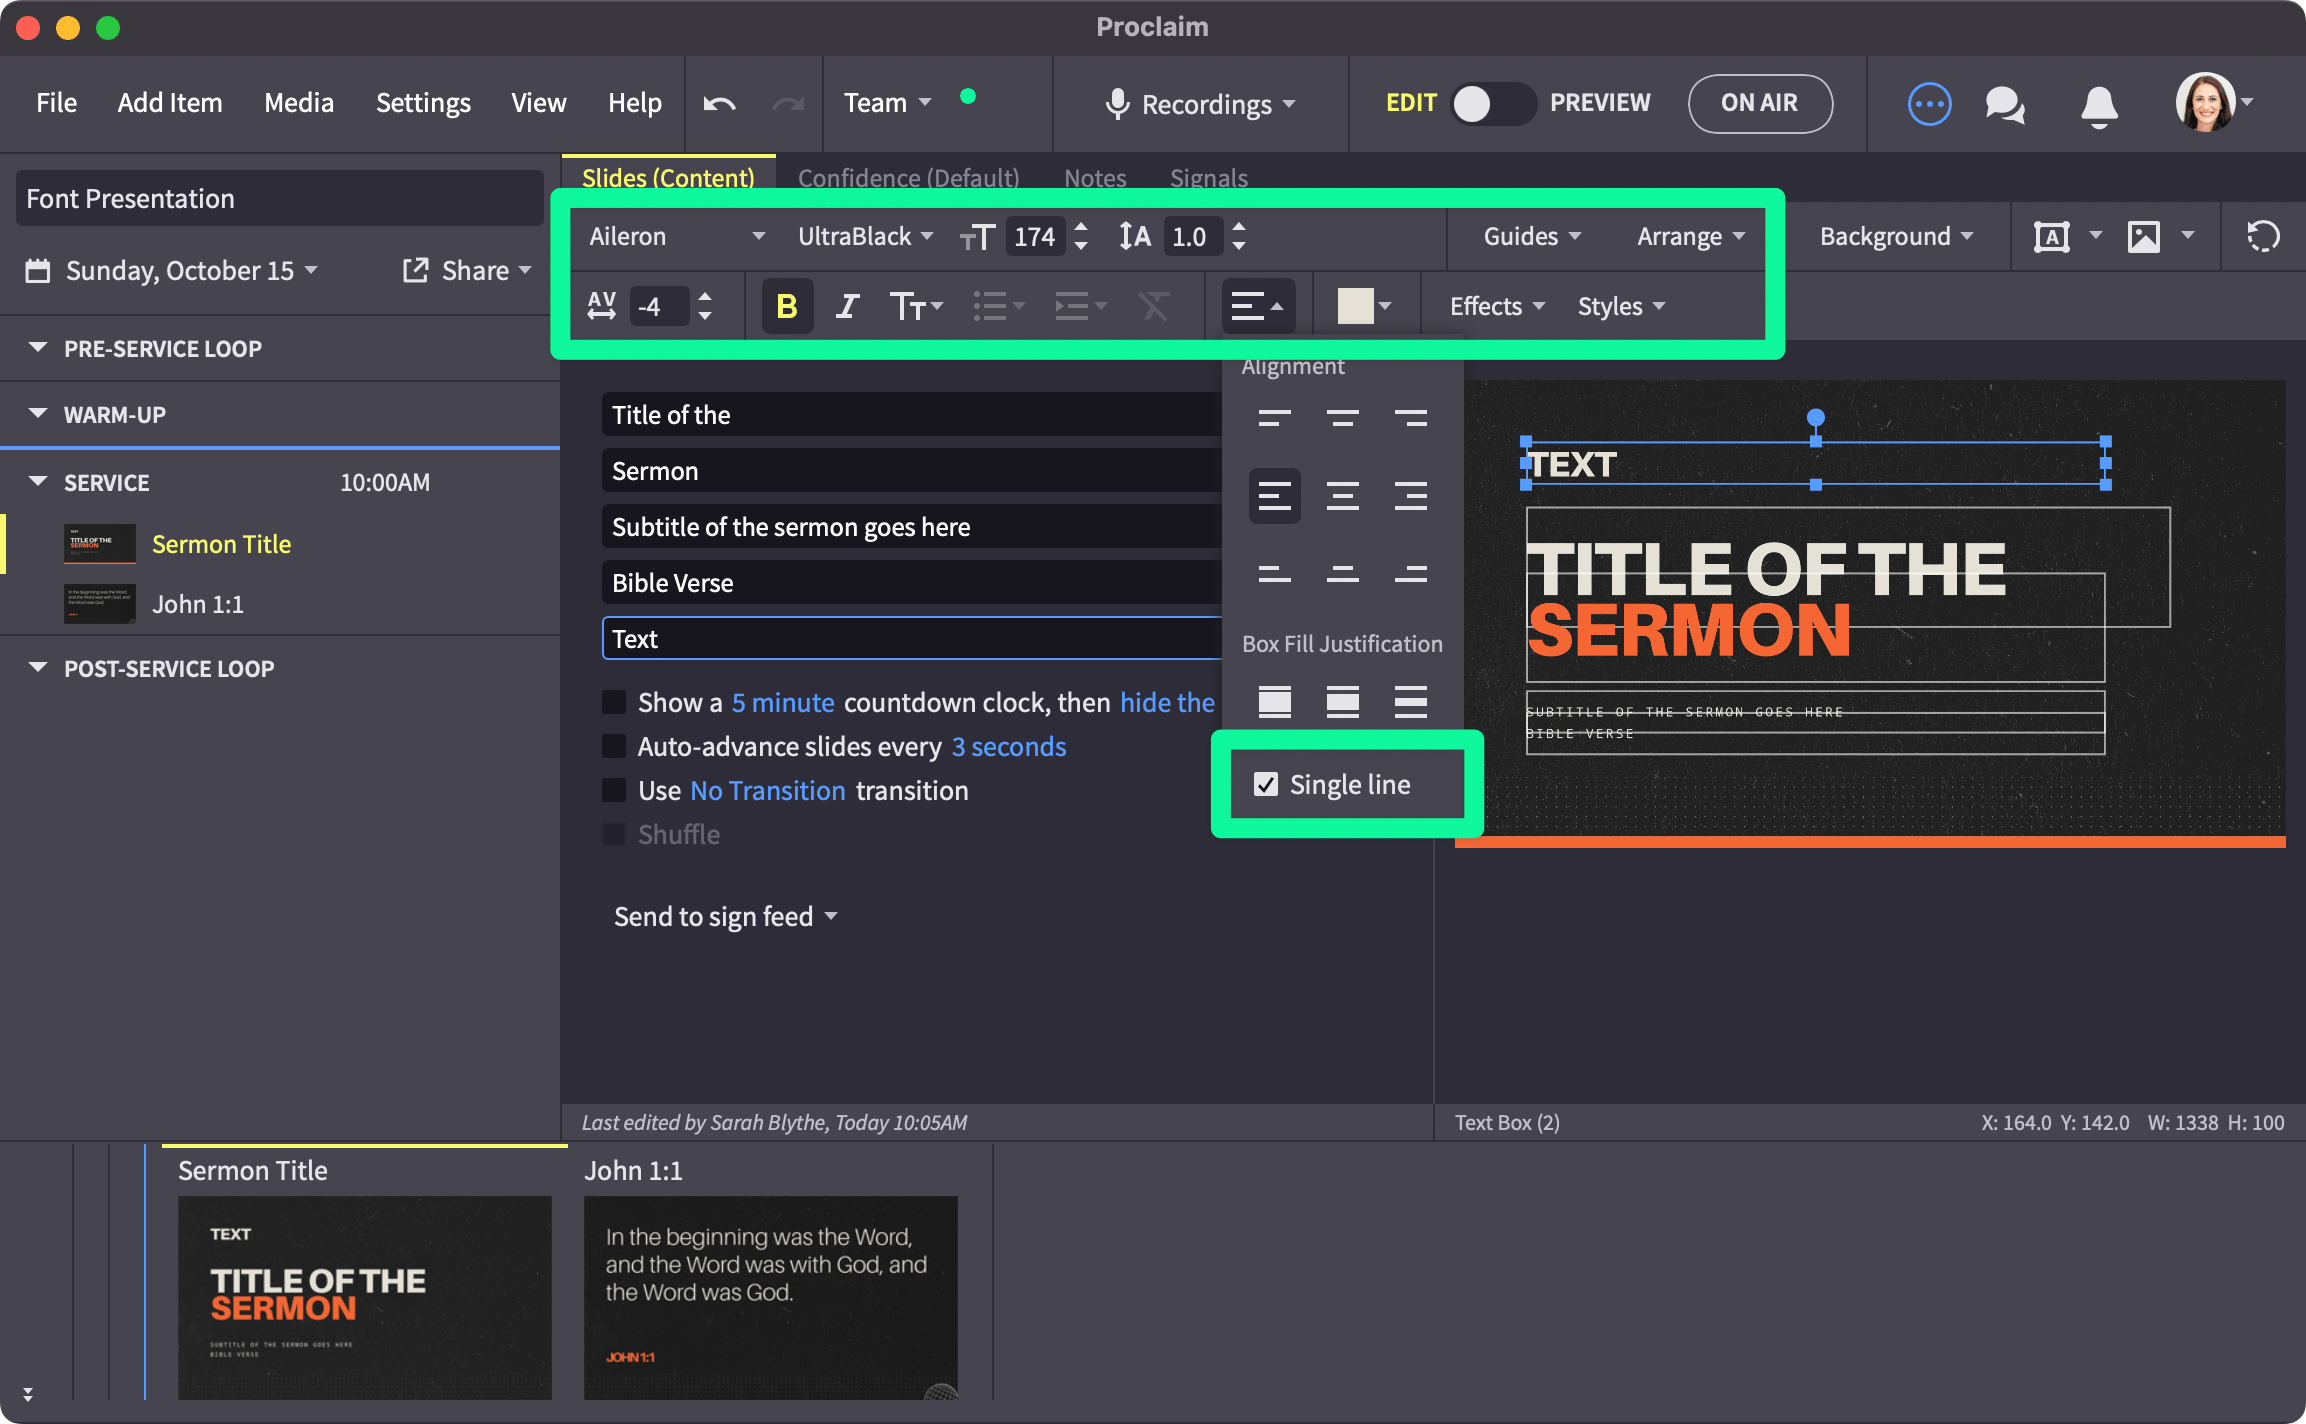 text editing toolbar visible with single line option highlighted